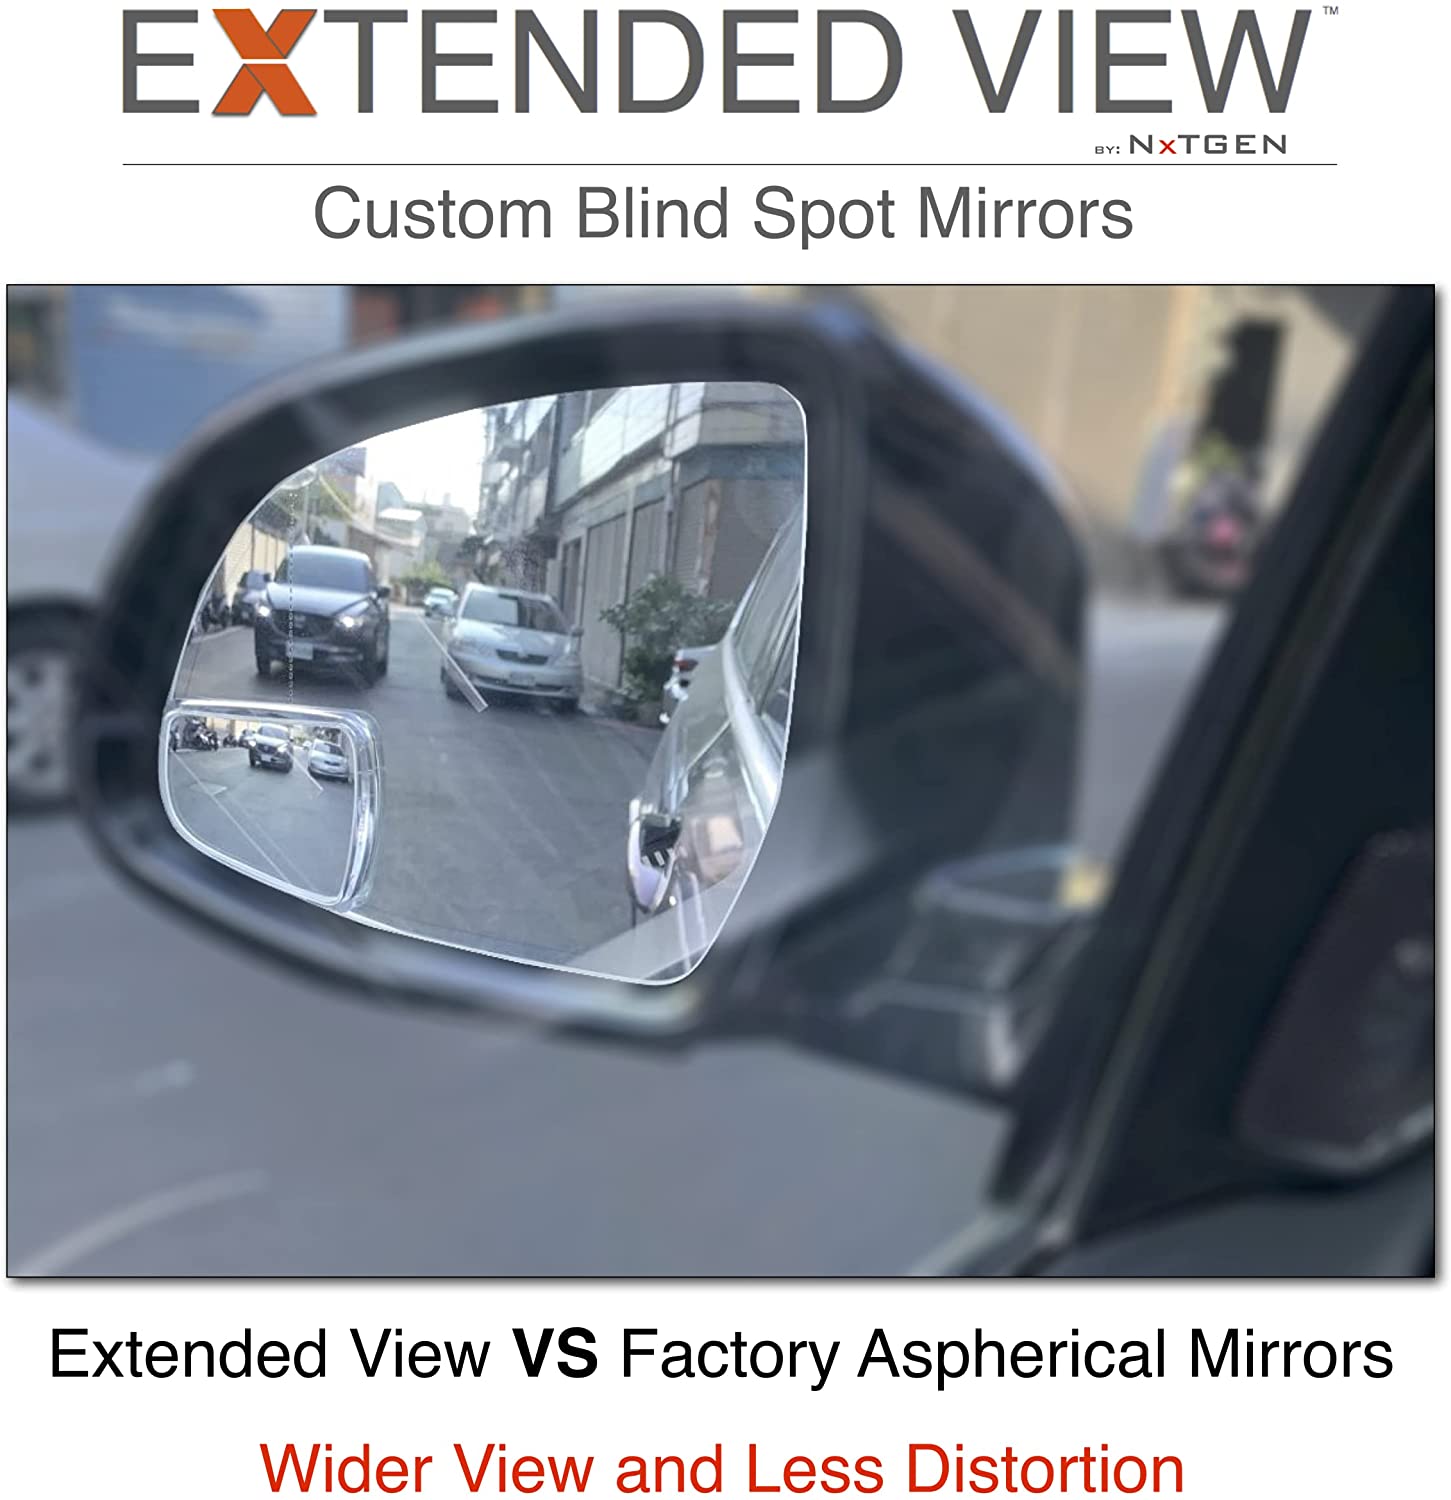 BMW X6 Blind Spot Mirrors | Extended View™